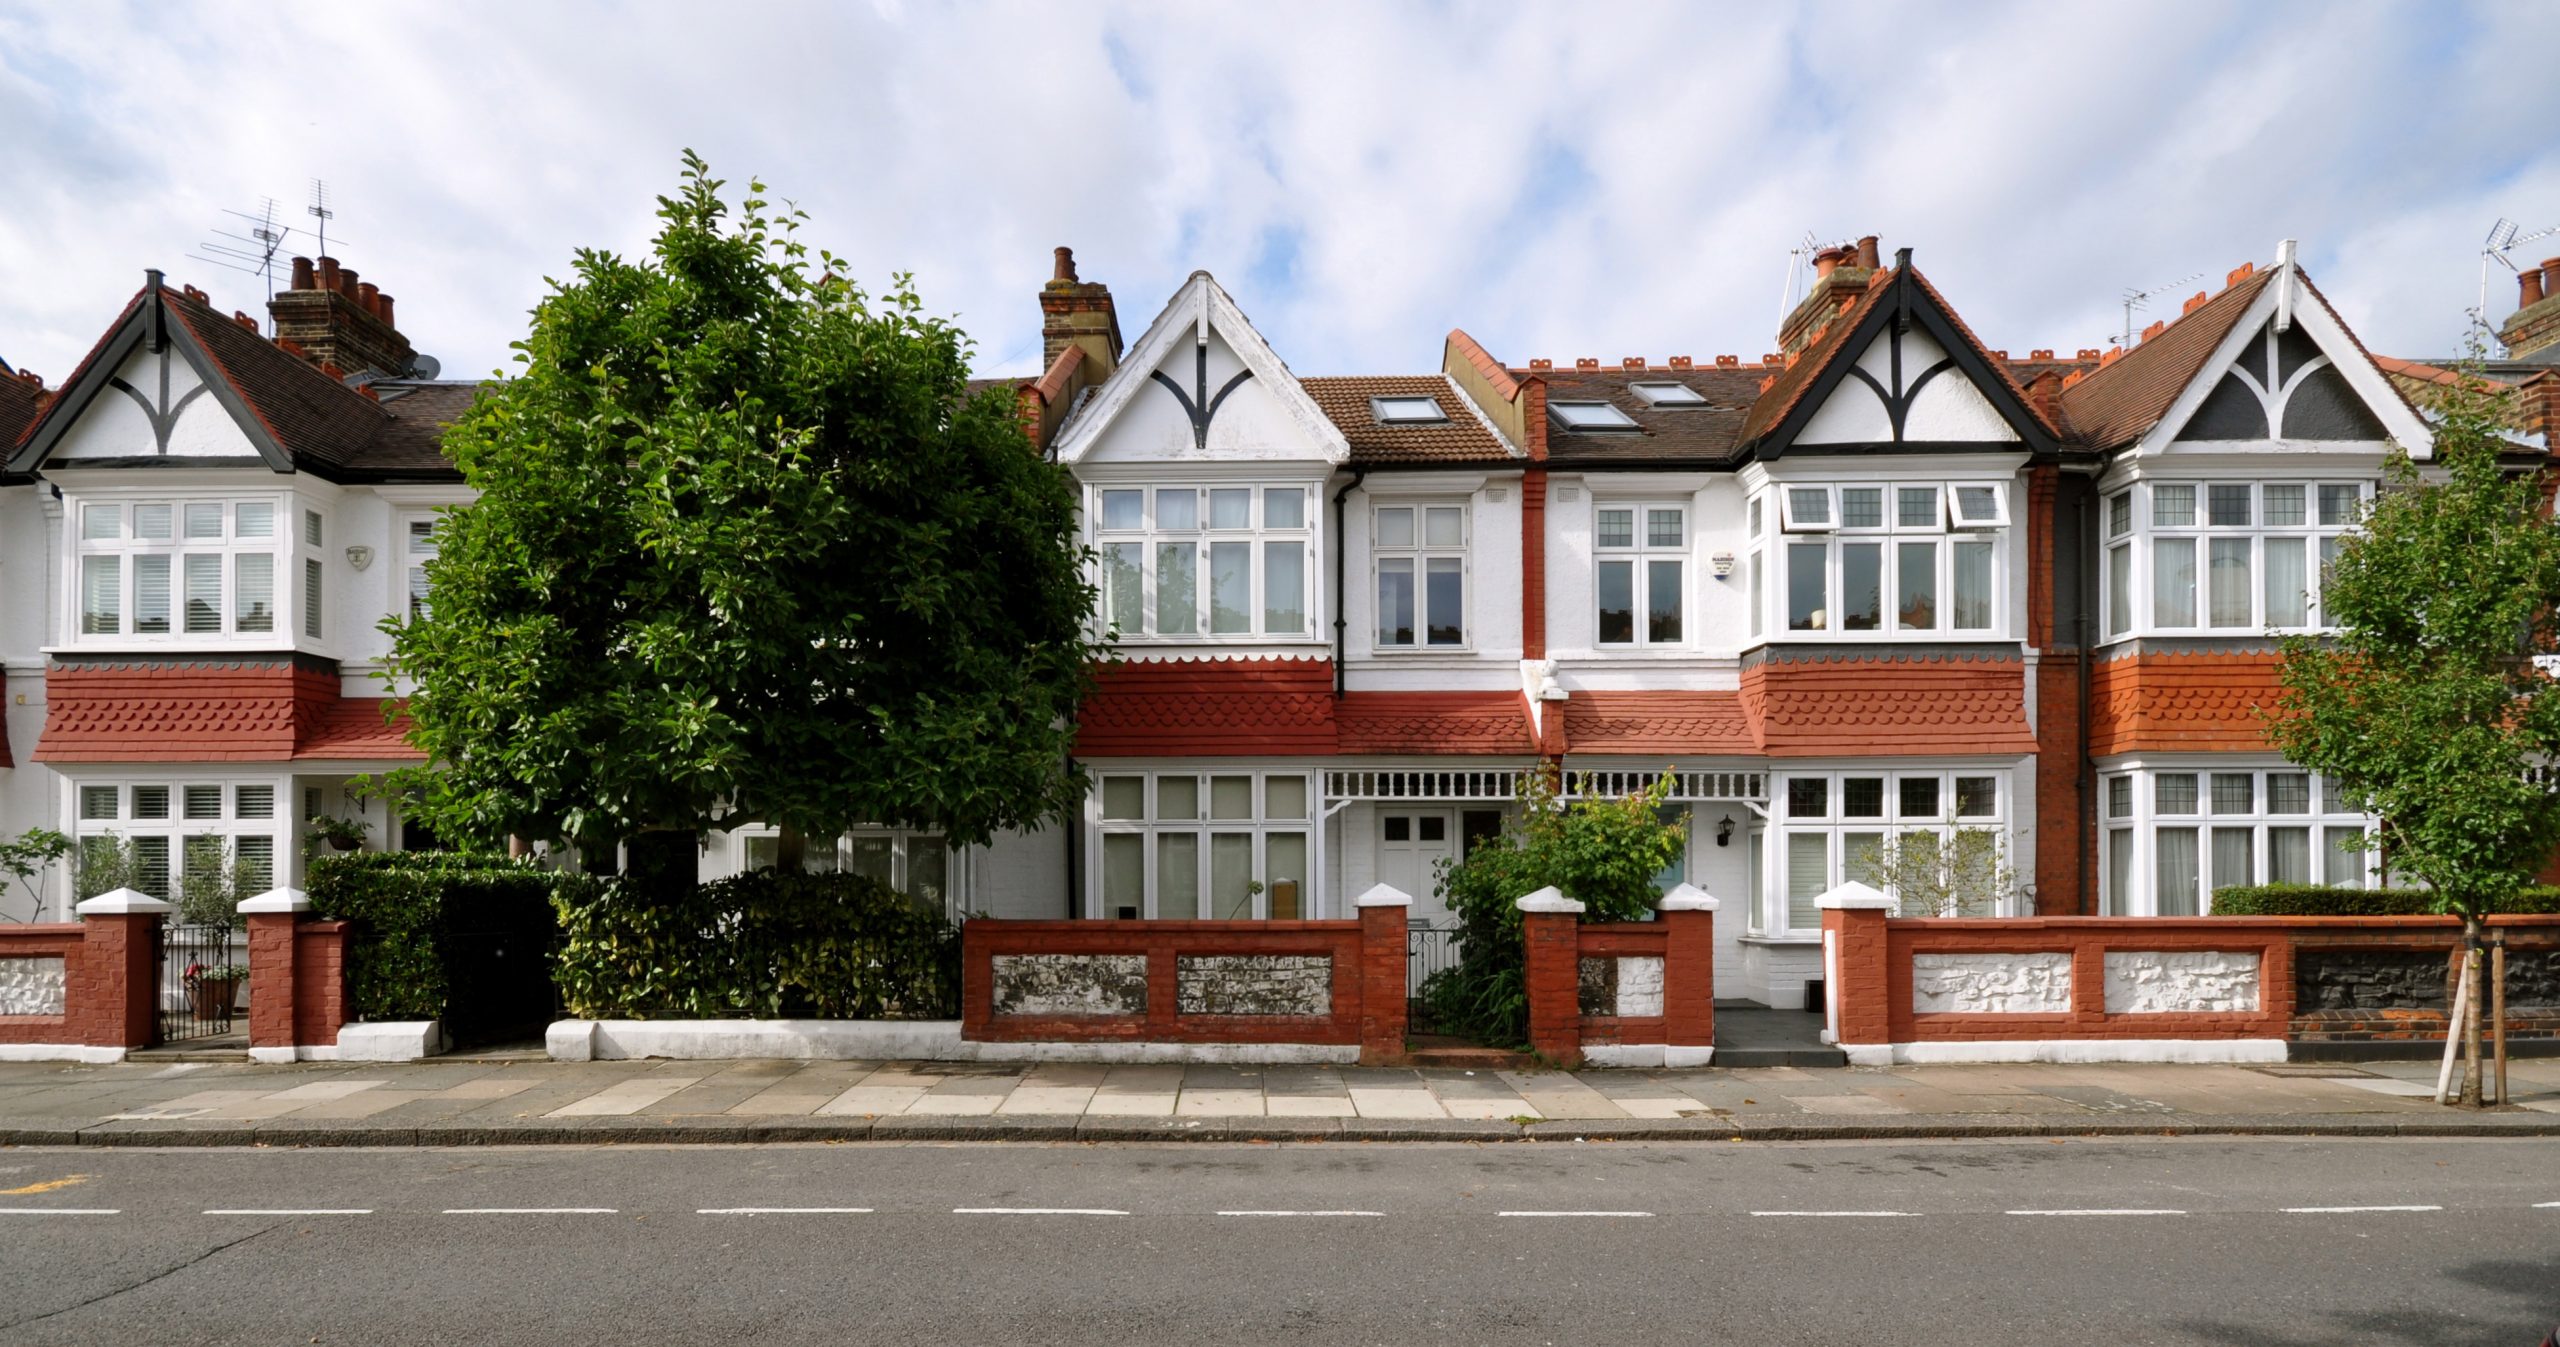 Early 20th Century Edwardian Terraced Houses - Anderson, Wilde & Harris - Your London-based experts in Party Wall surveys